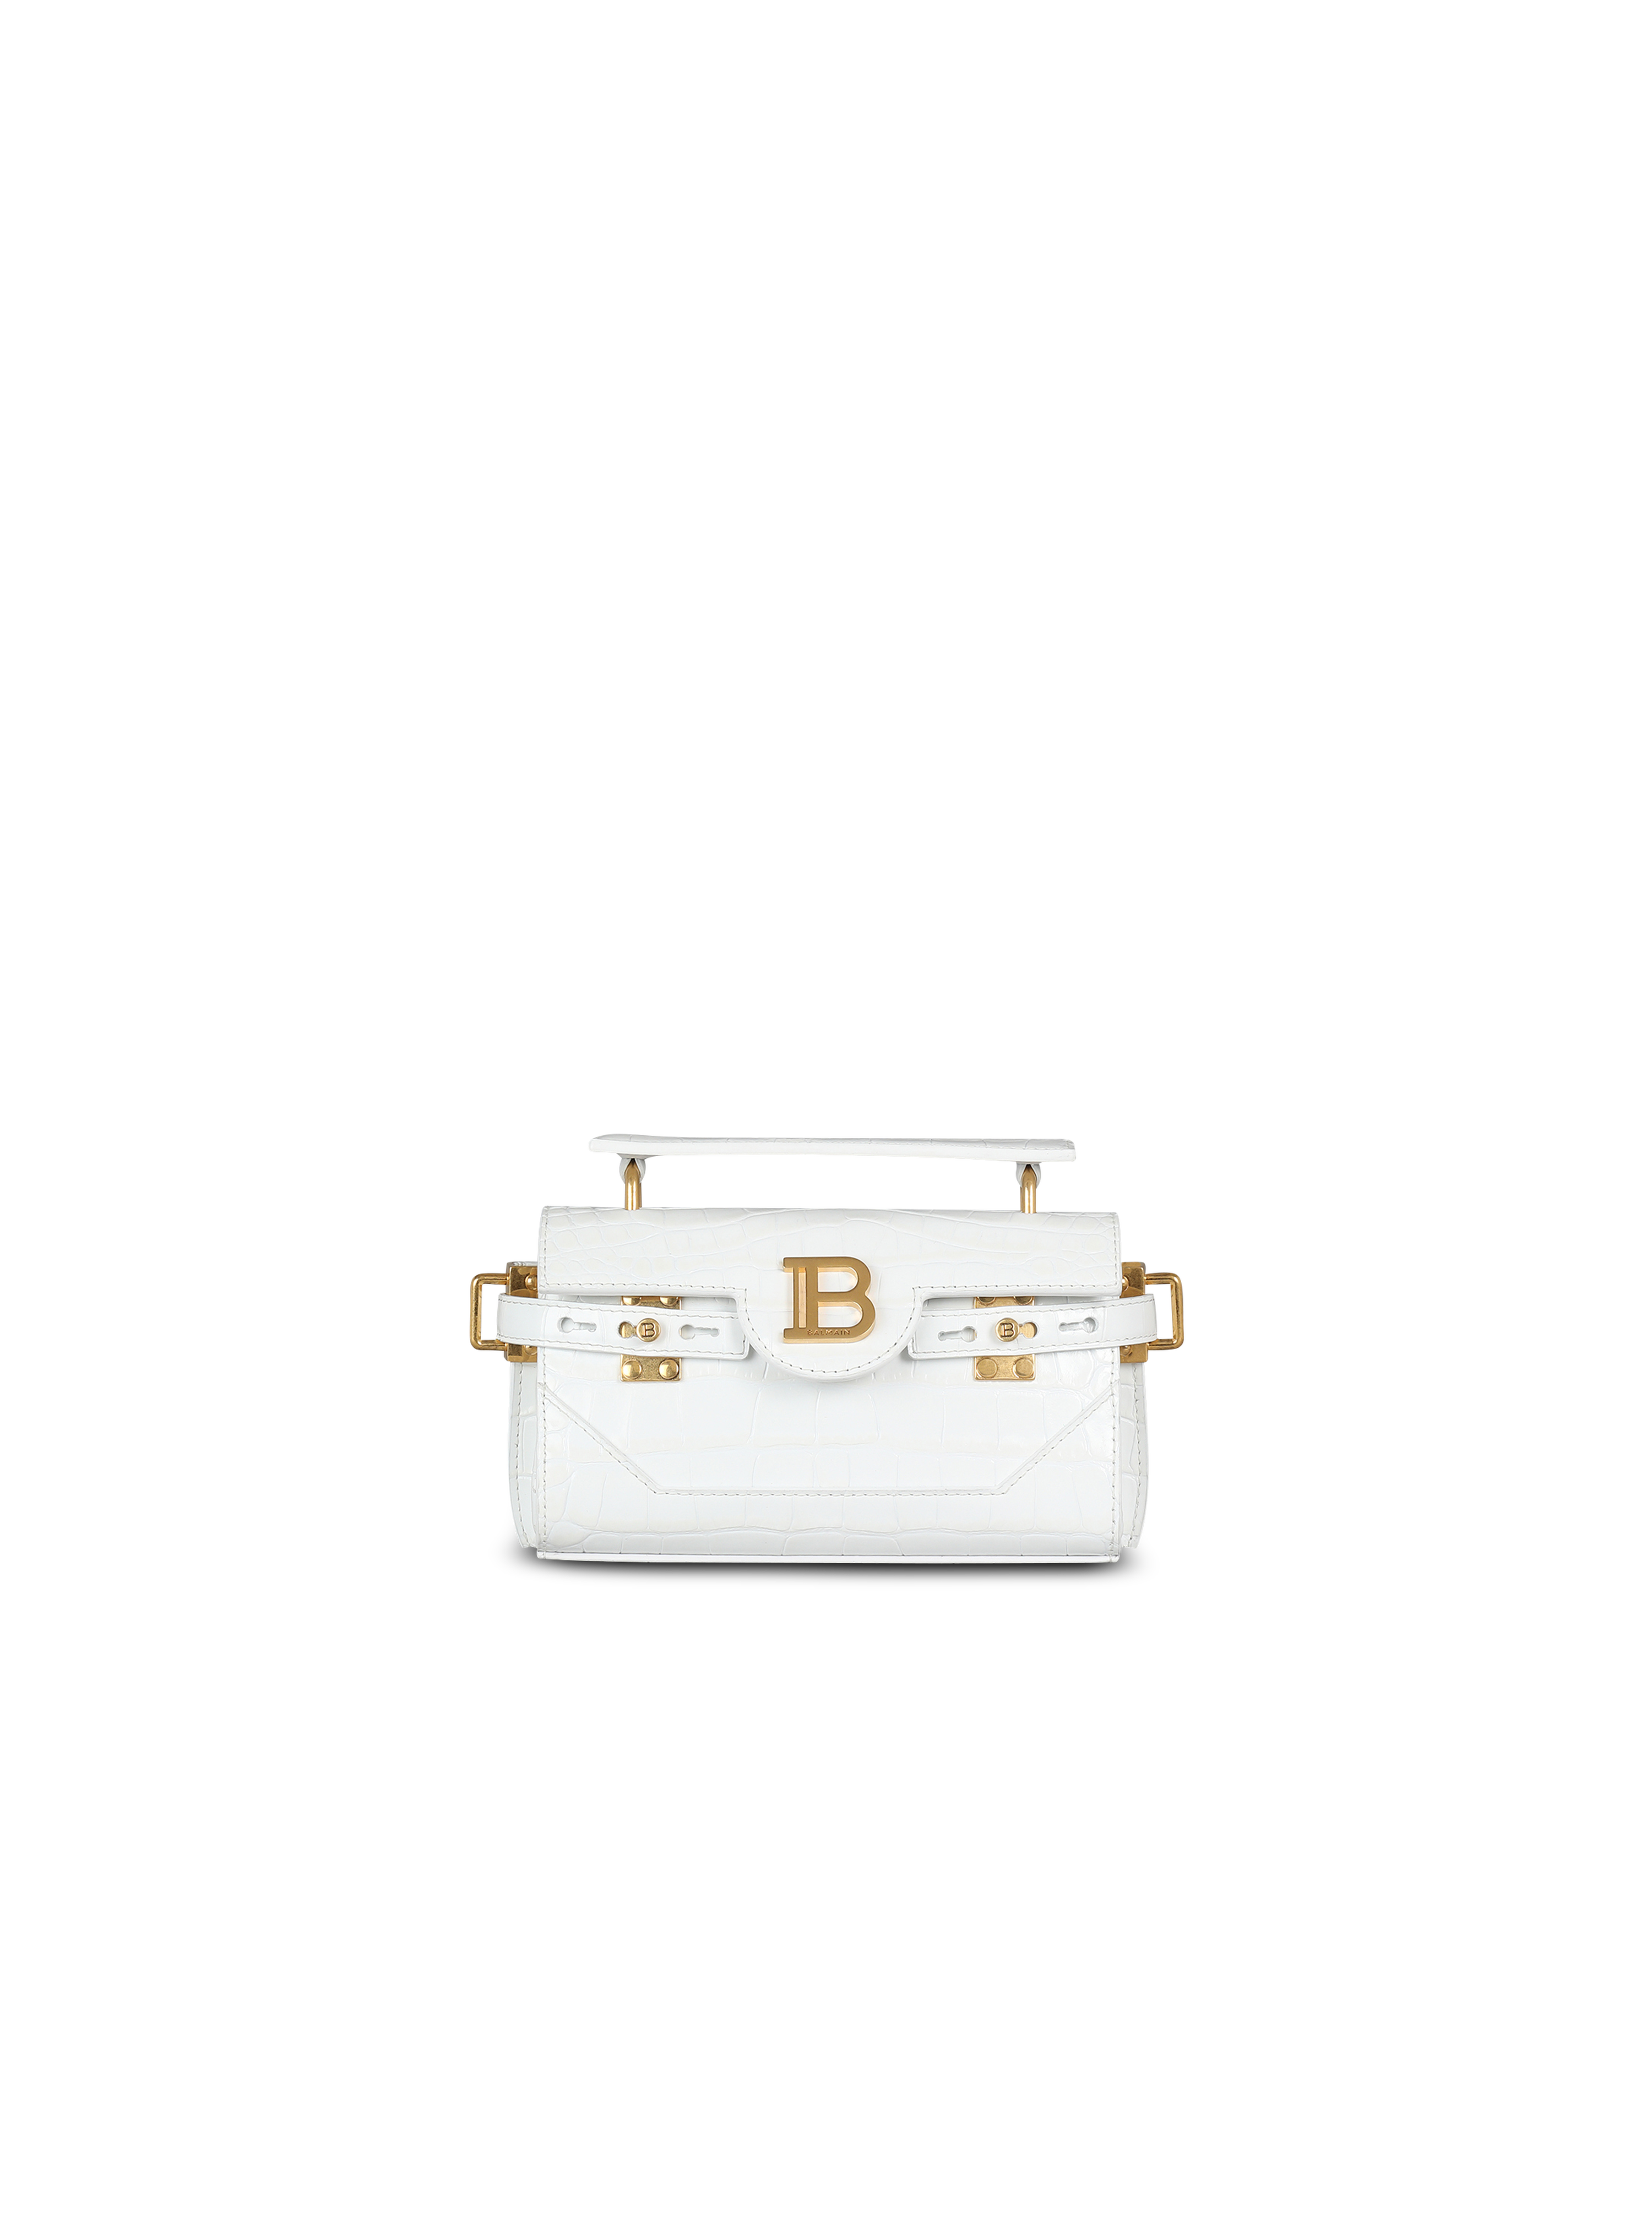 B-Buzz 19 bag in crocodile-embossed leather, white